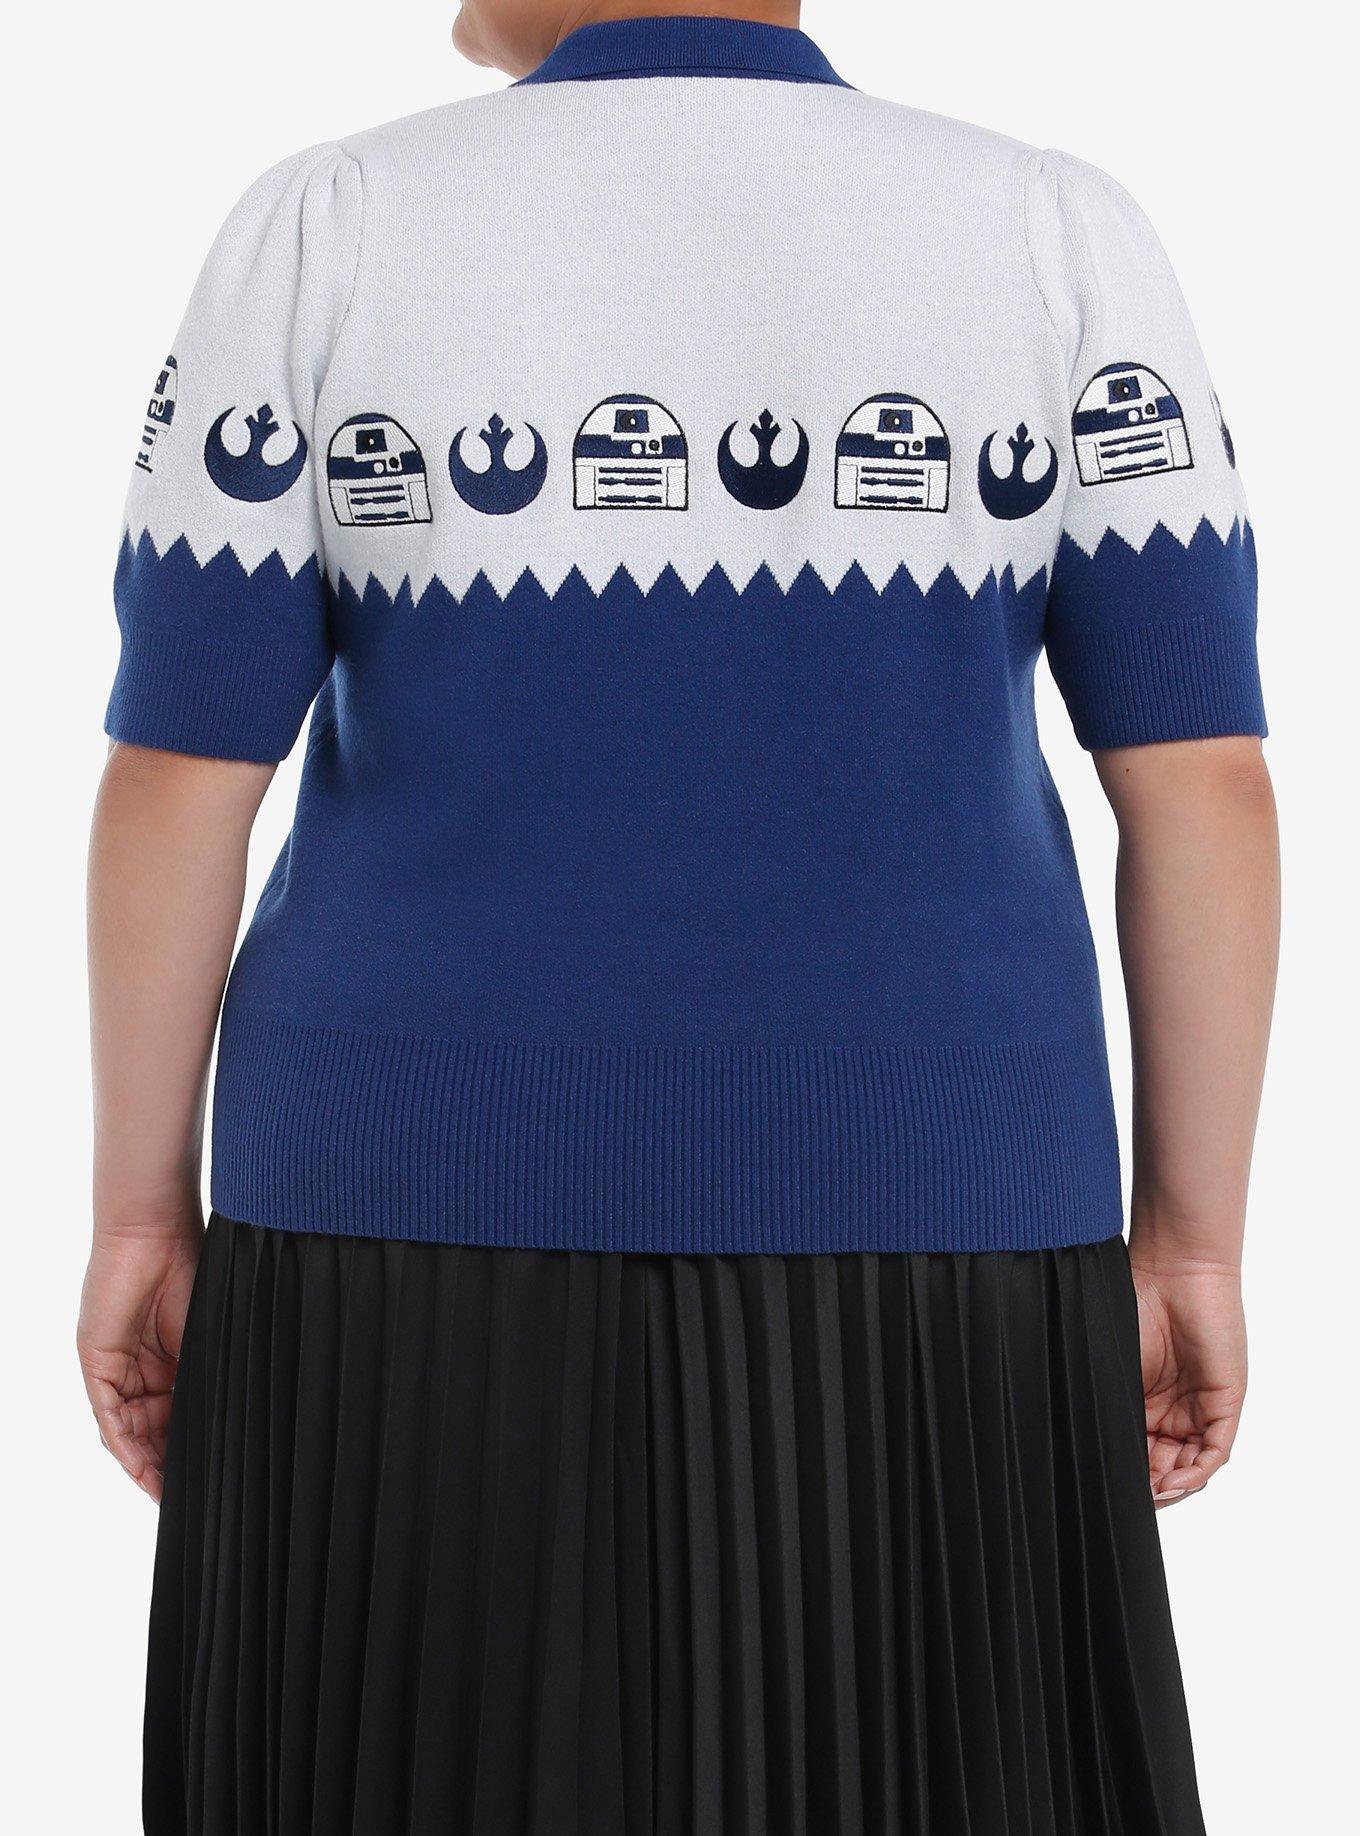 Her Universe Star Wars Rebel Droid Sweater Top Plus Size Her Universe Exclusive, BLUE  WHITE, alternate